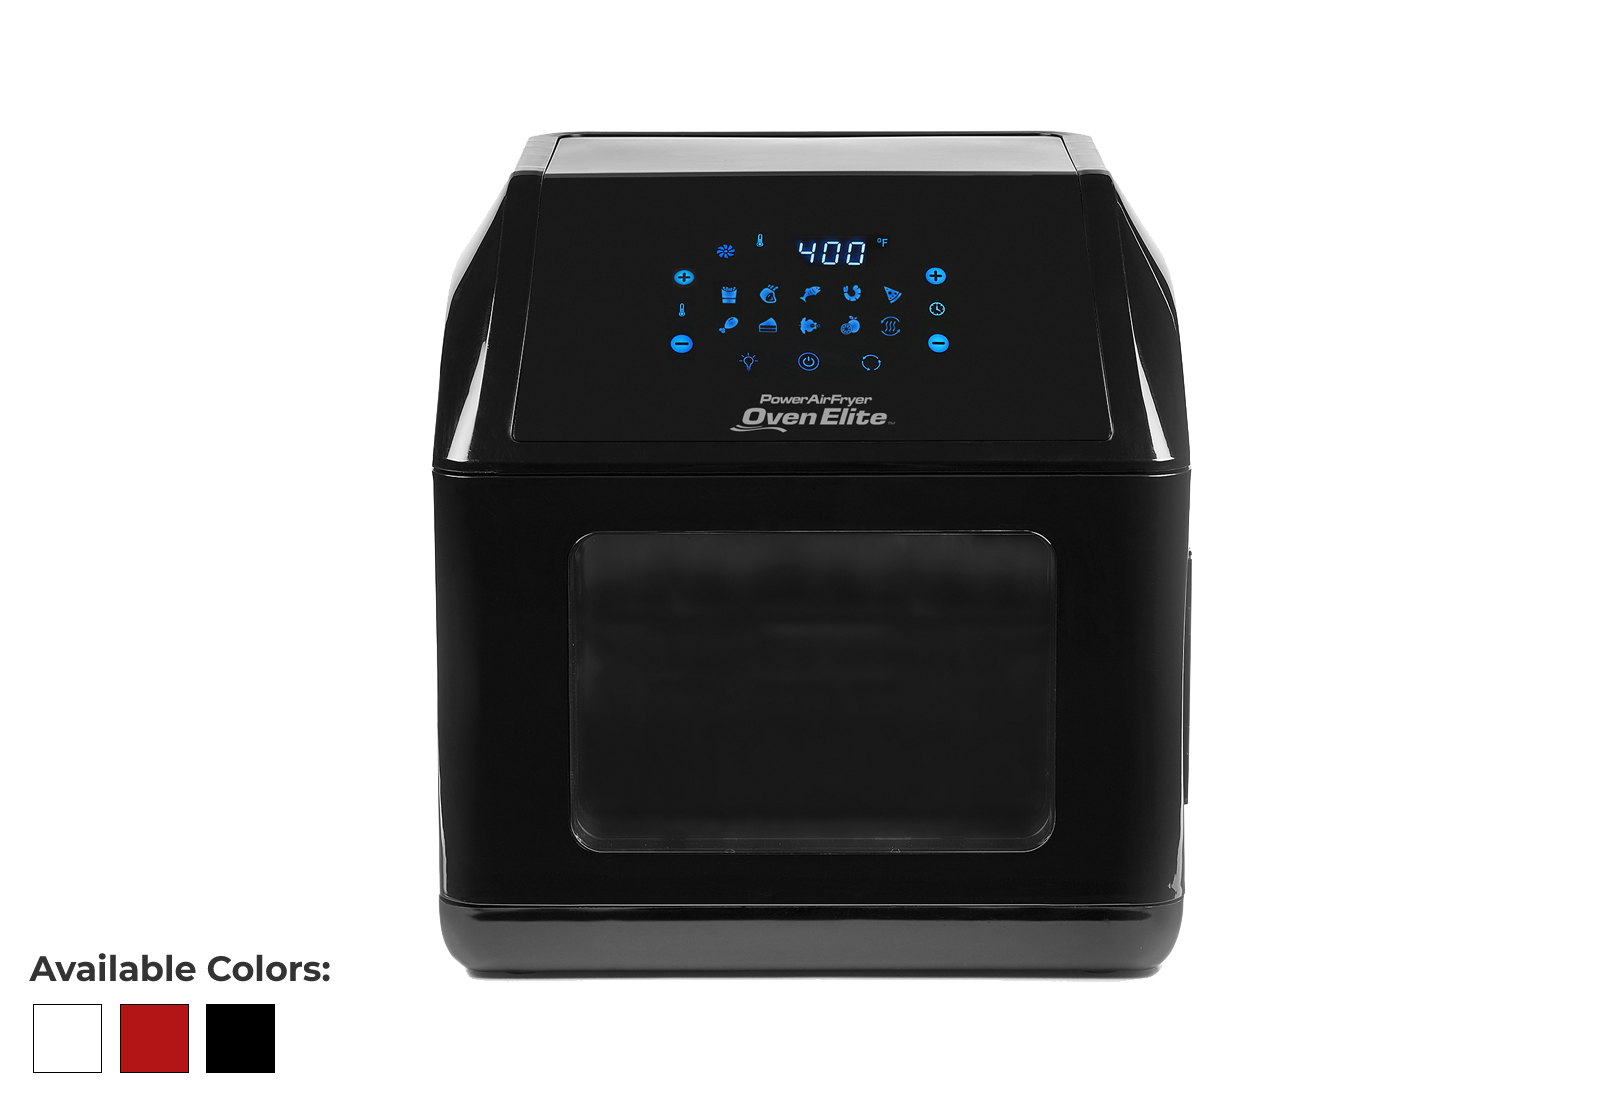 Power Airfryer Oven Elite Product Image